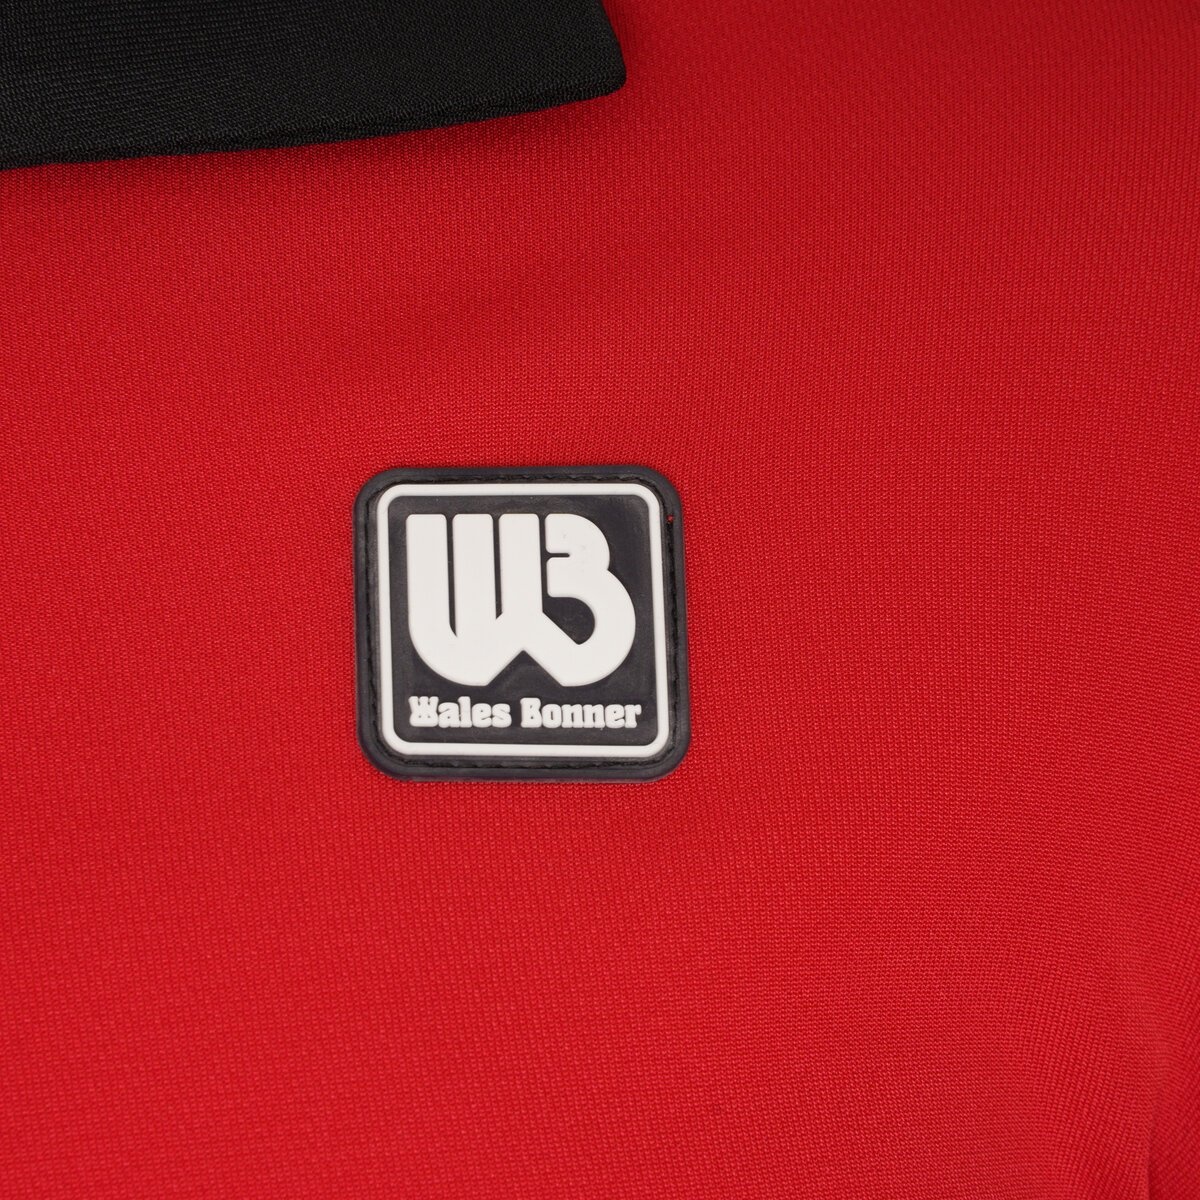 Home Jersey Shirt in Red/black - 3